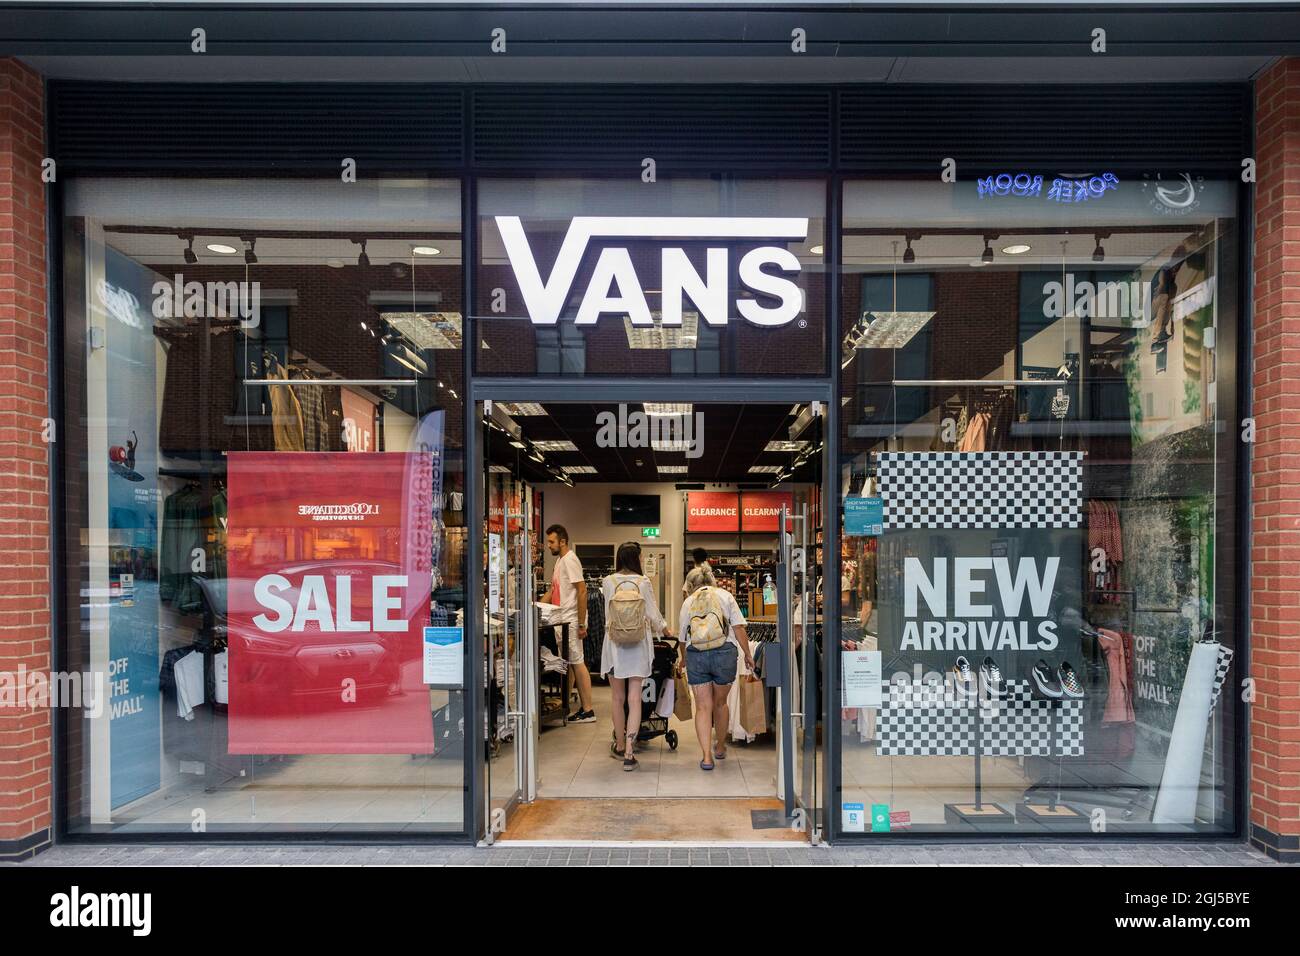 Vans Store High Resolution Stock Photography and Images - Alamy